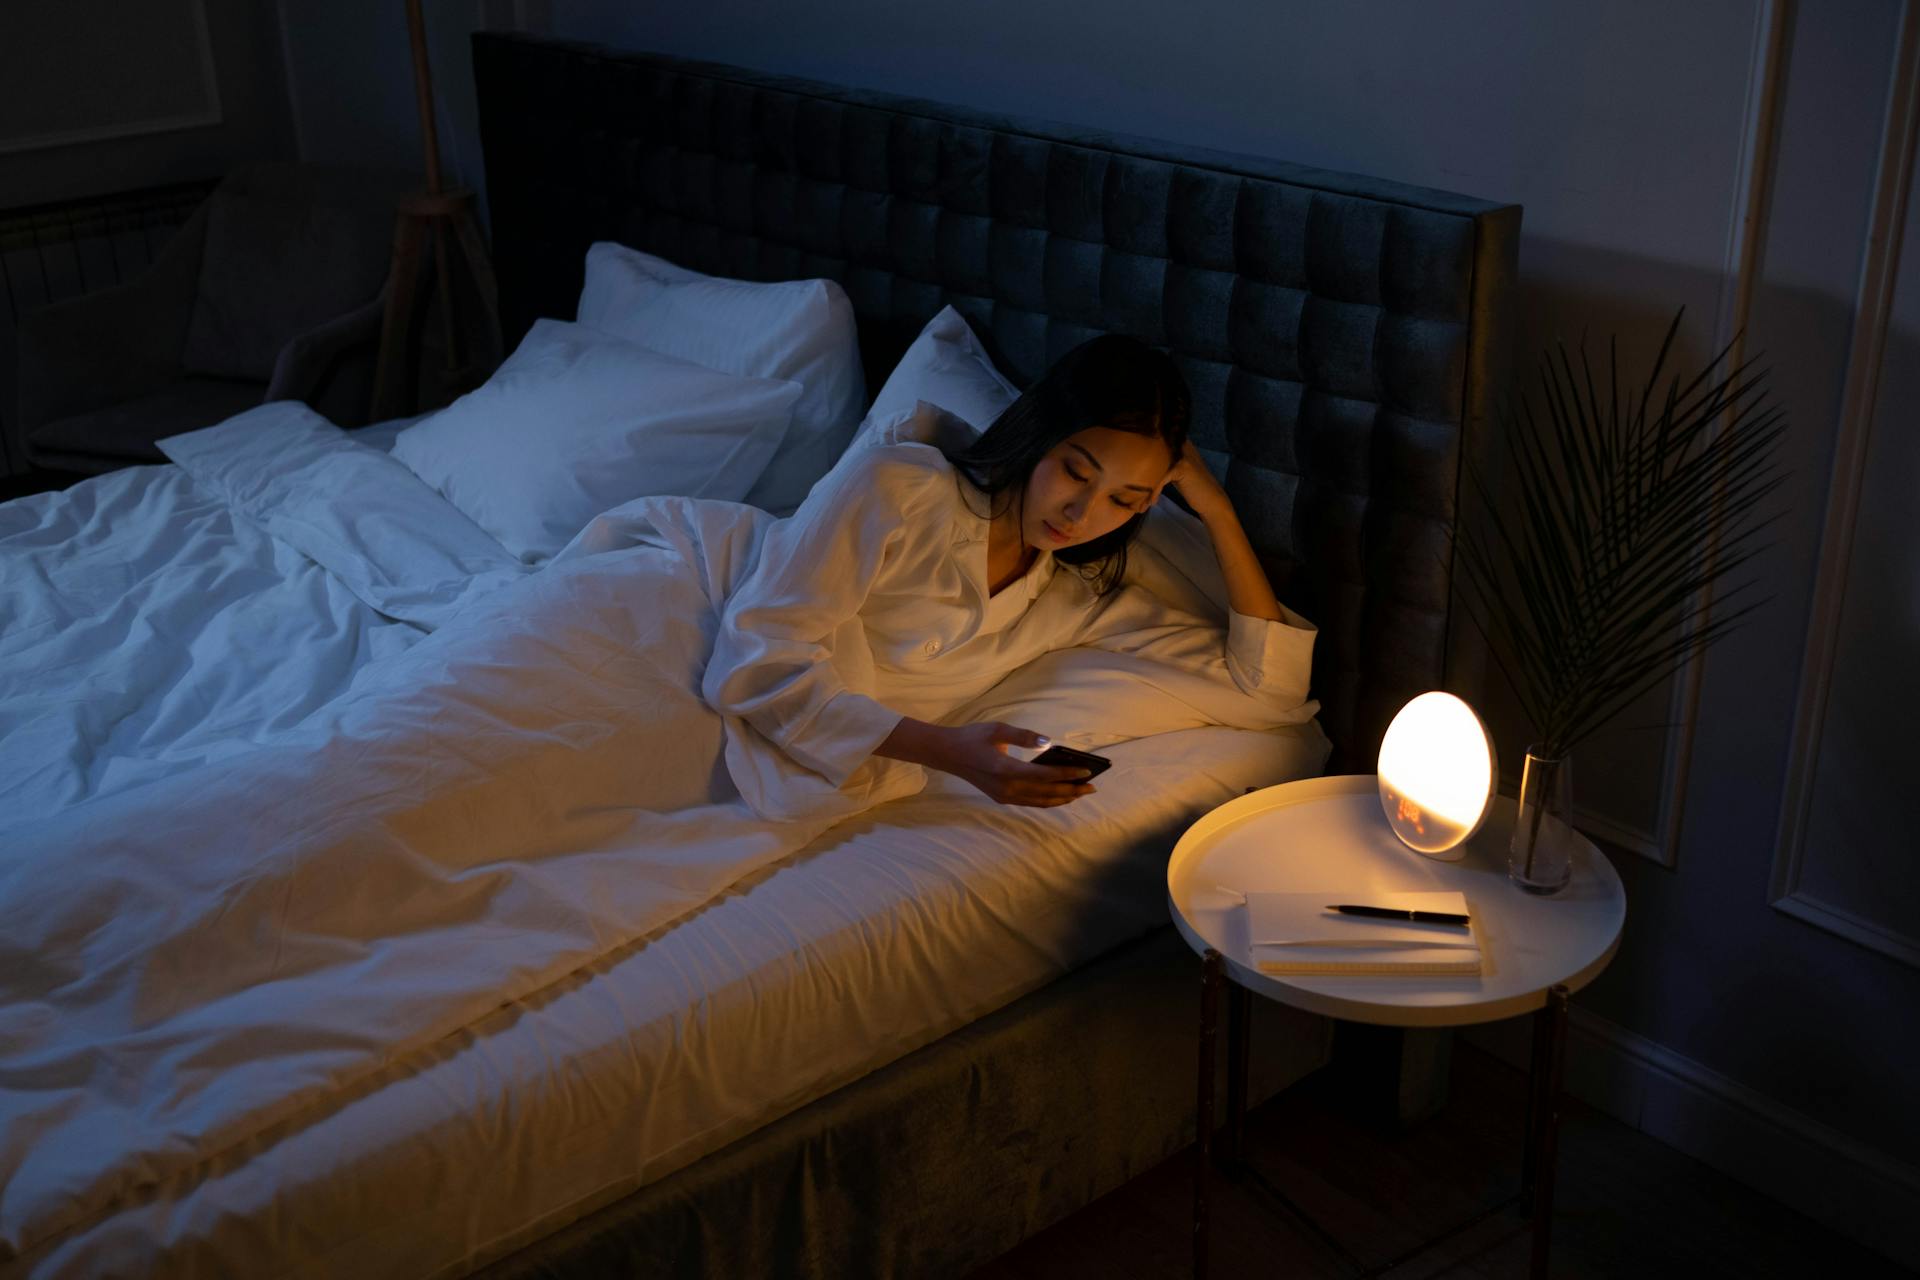 A woman using her phone in her bed | Source: Pexels